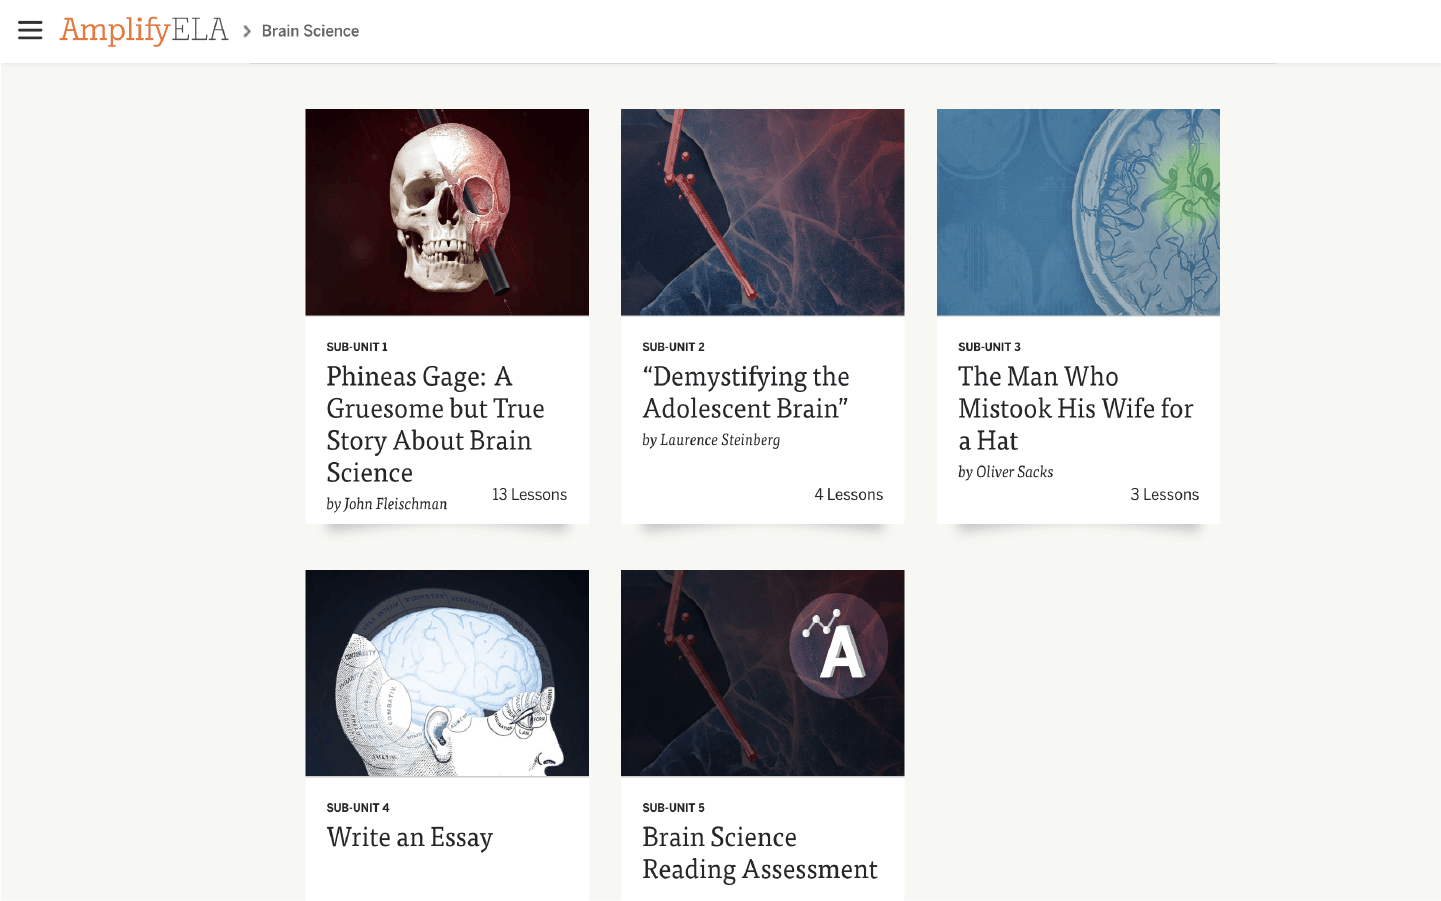 Educational website thumbnails for Amplify ELA: details human brain science topics and lessons with illustrations, including a famous case of Phineas Gage.